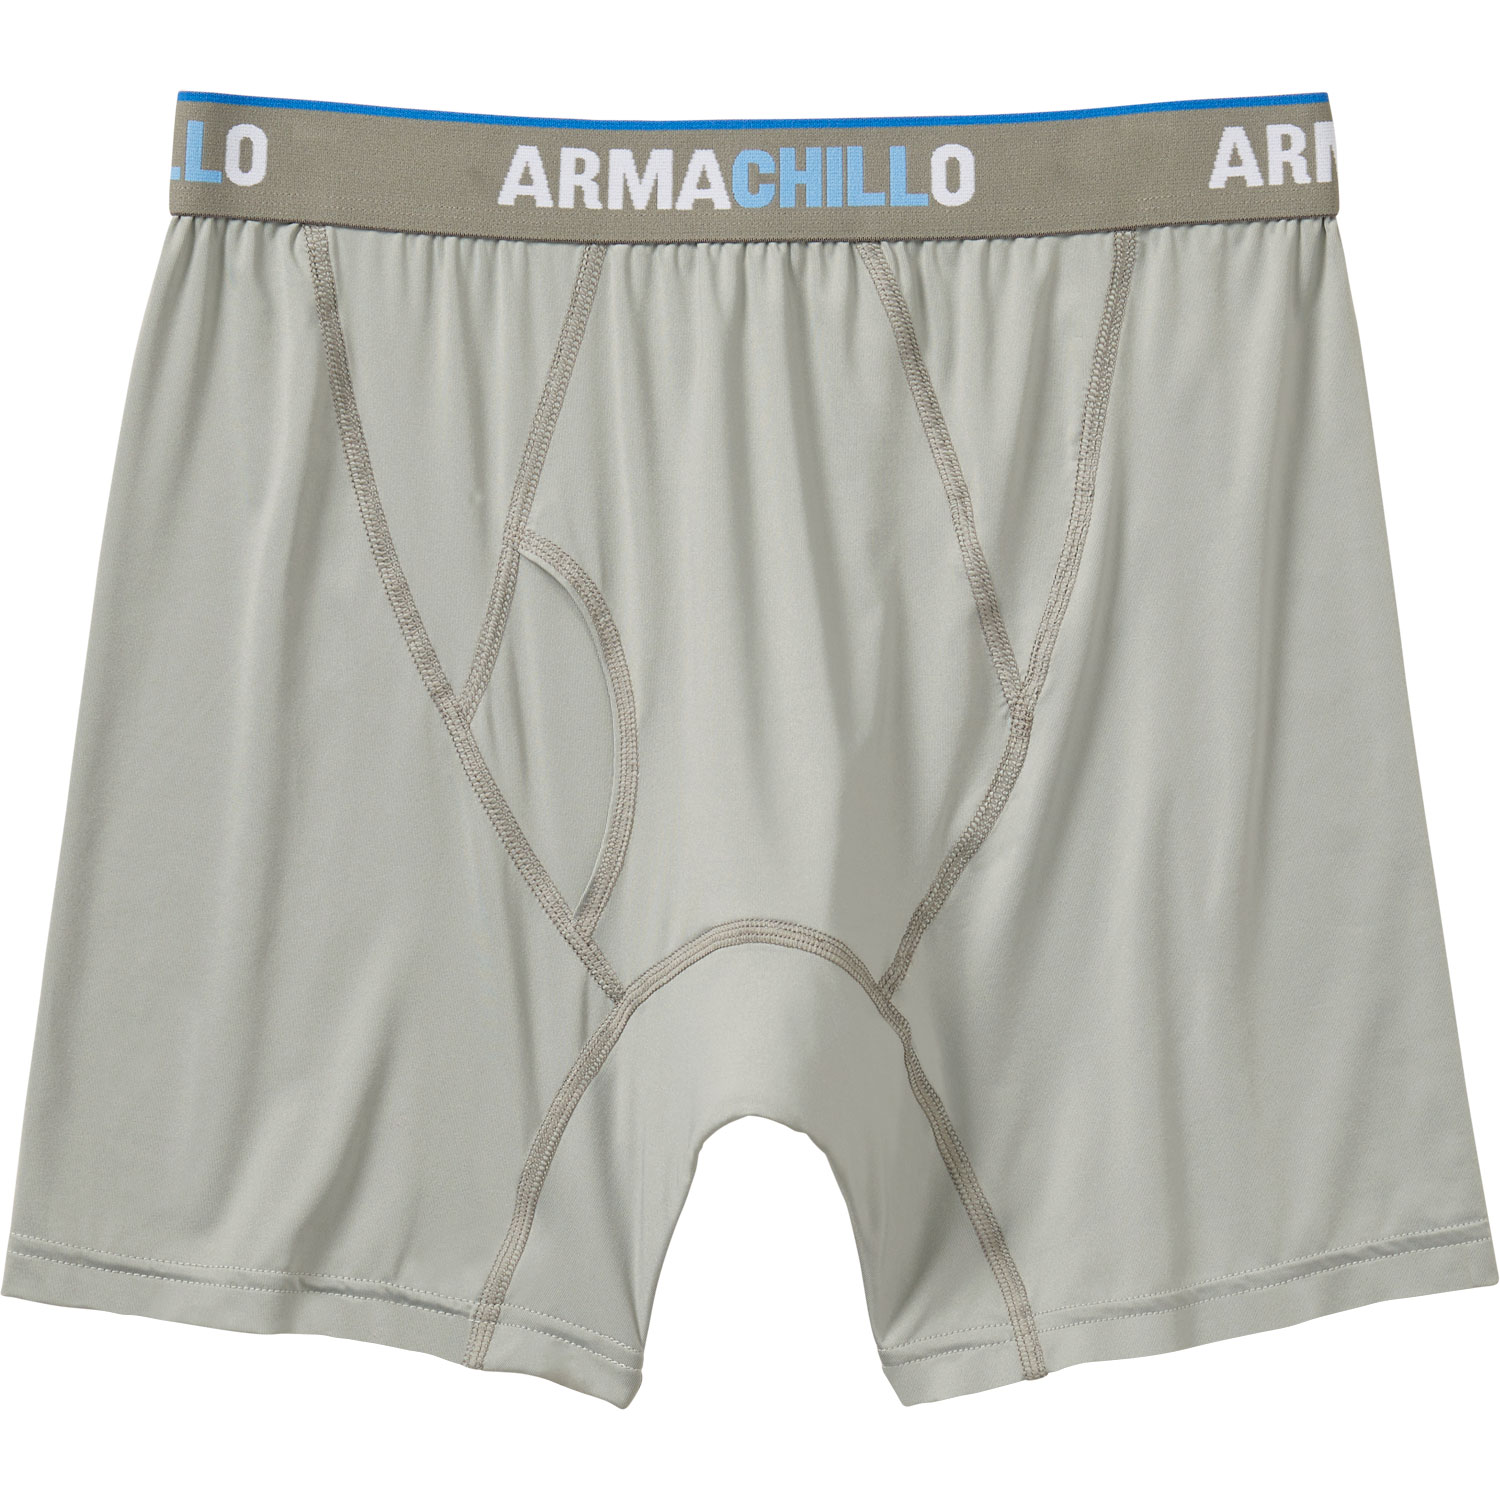 Men's Armachillo Cooling Boxer Briefs | Duluth Trading Company